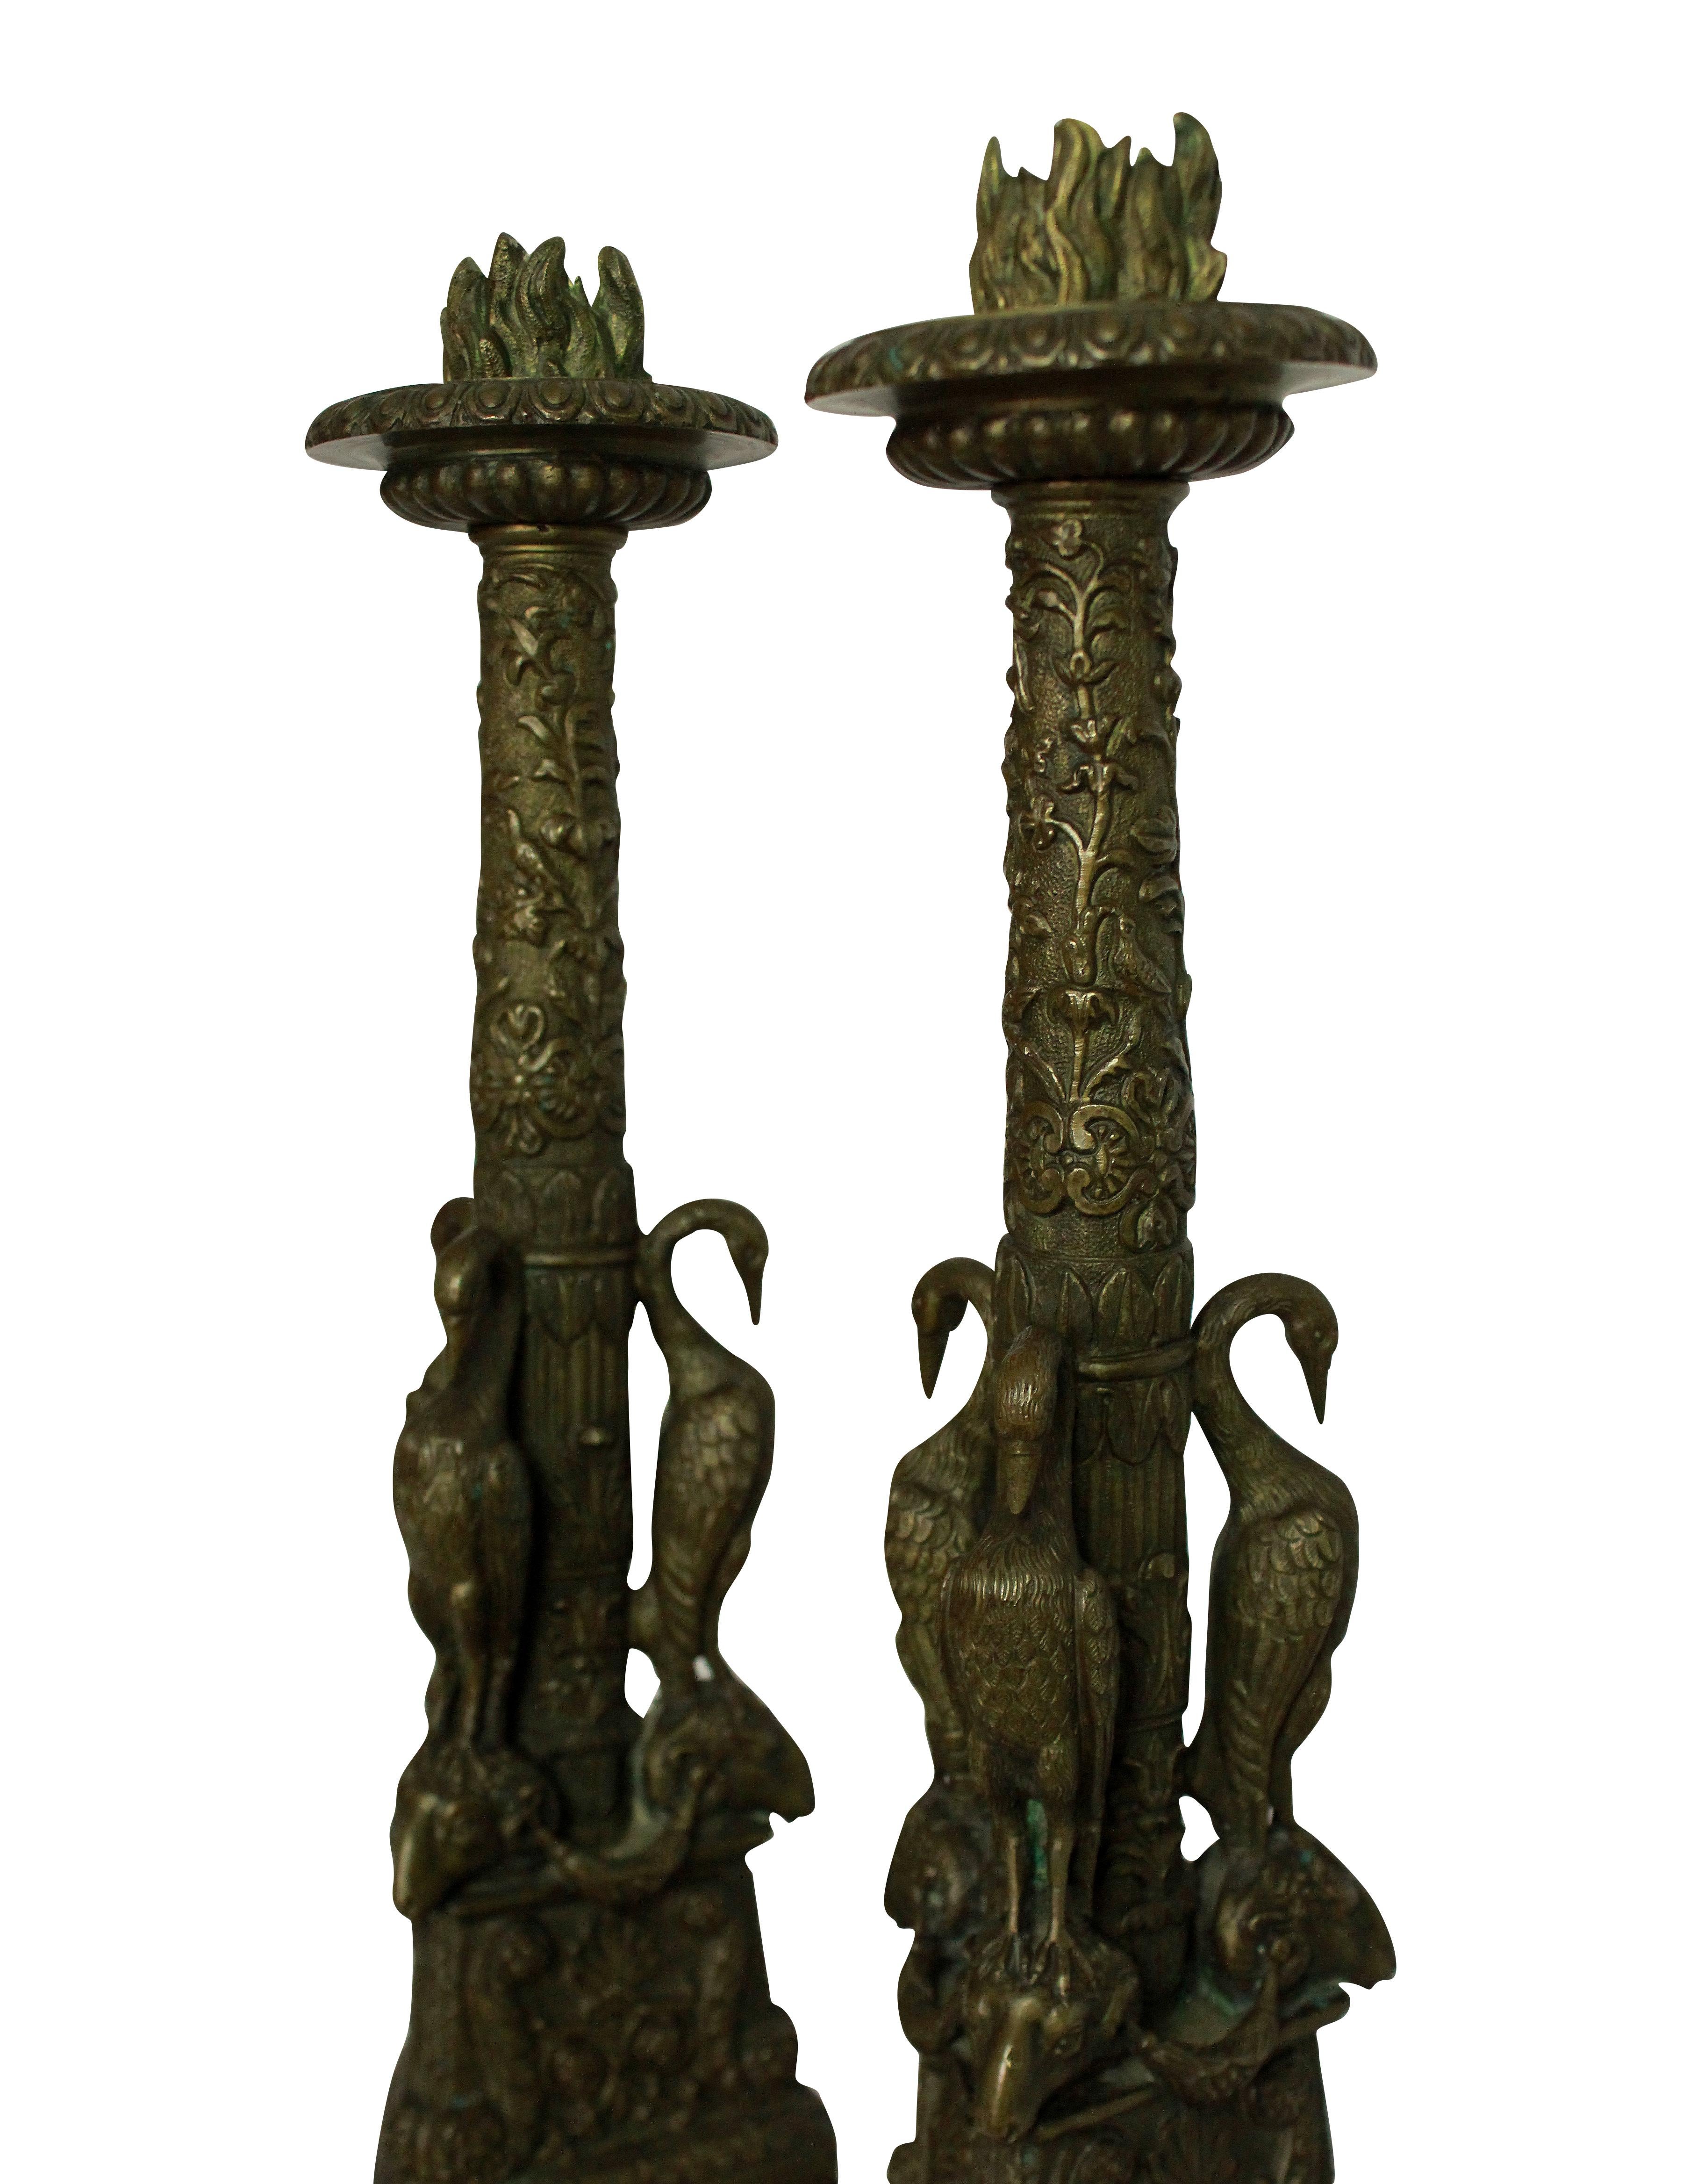 English Pair of Exceptional Bronze Candlesticks after the Piranesi Model